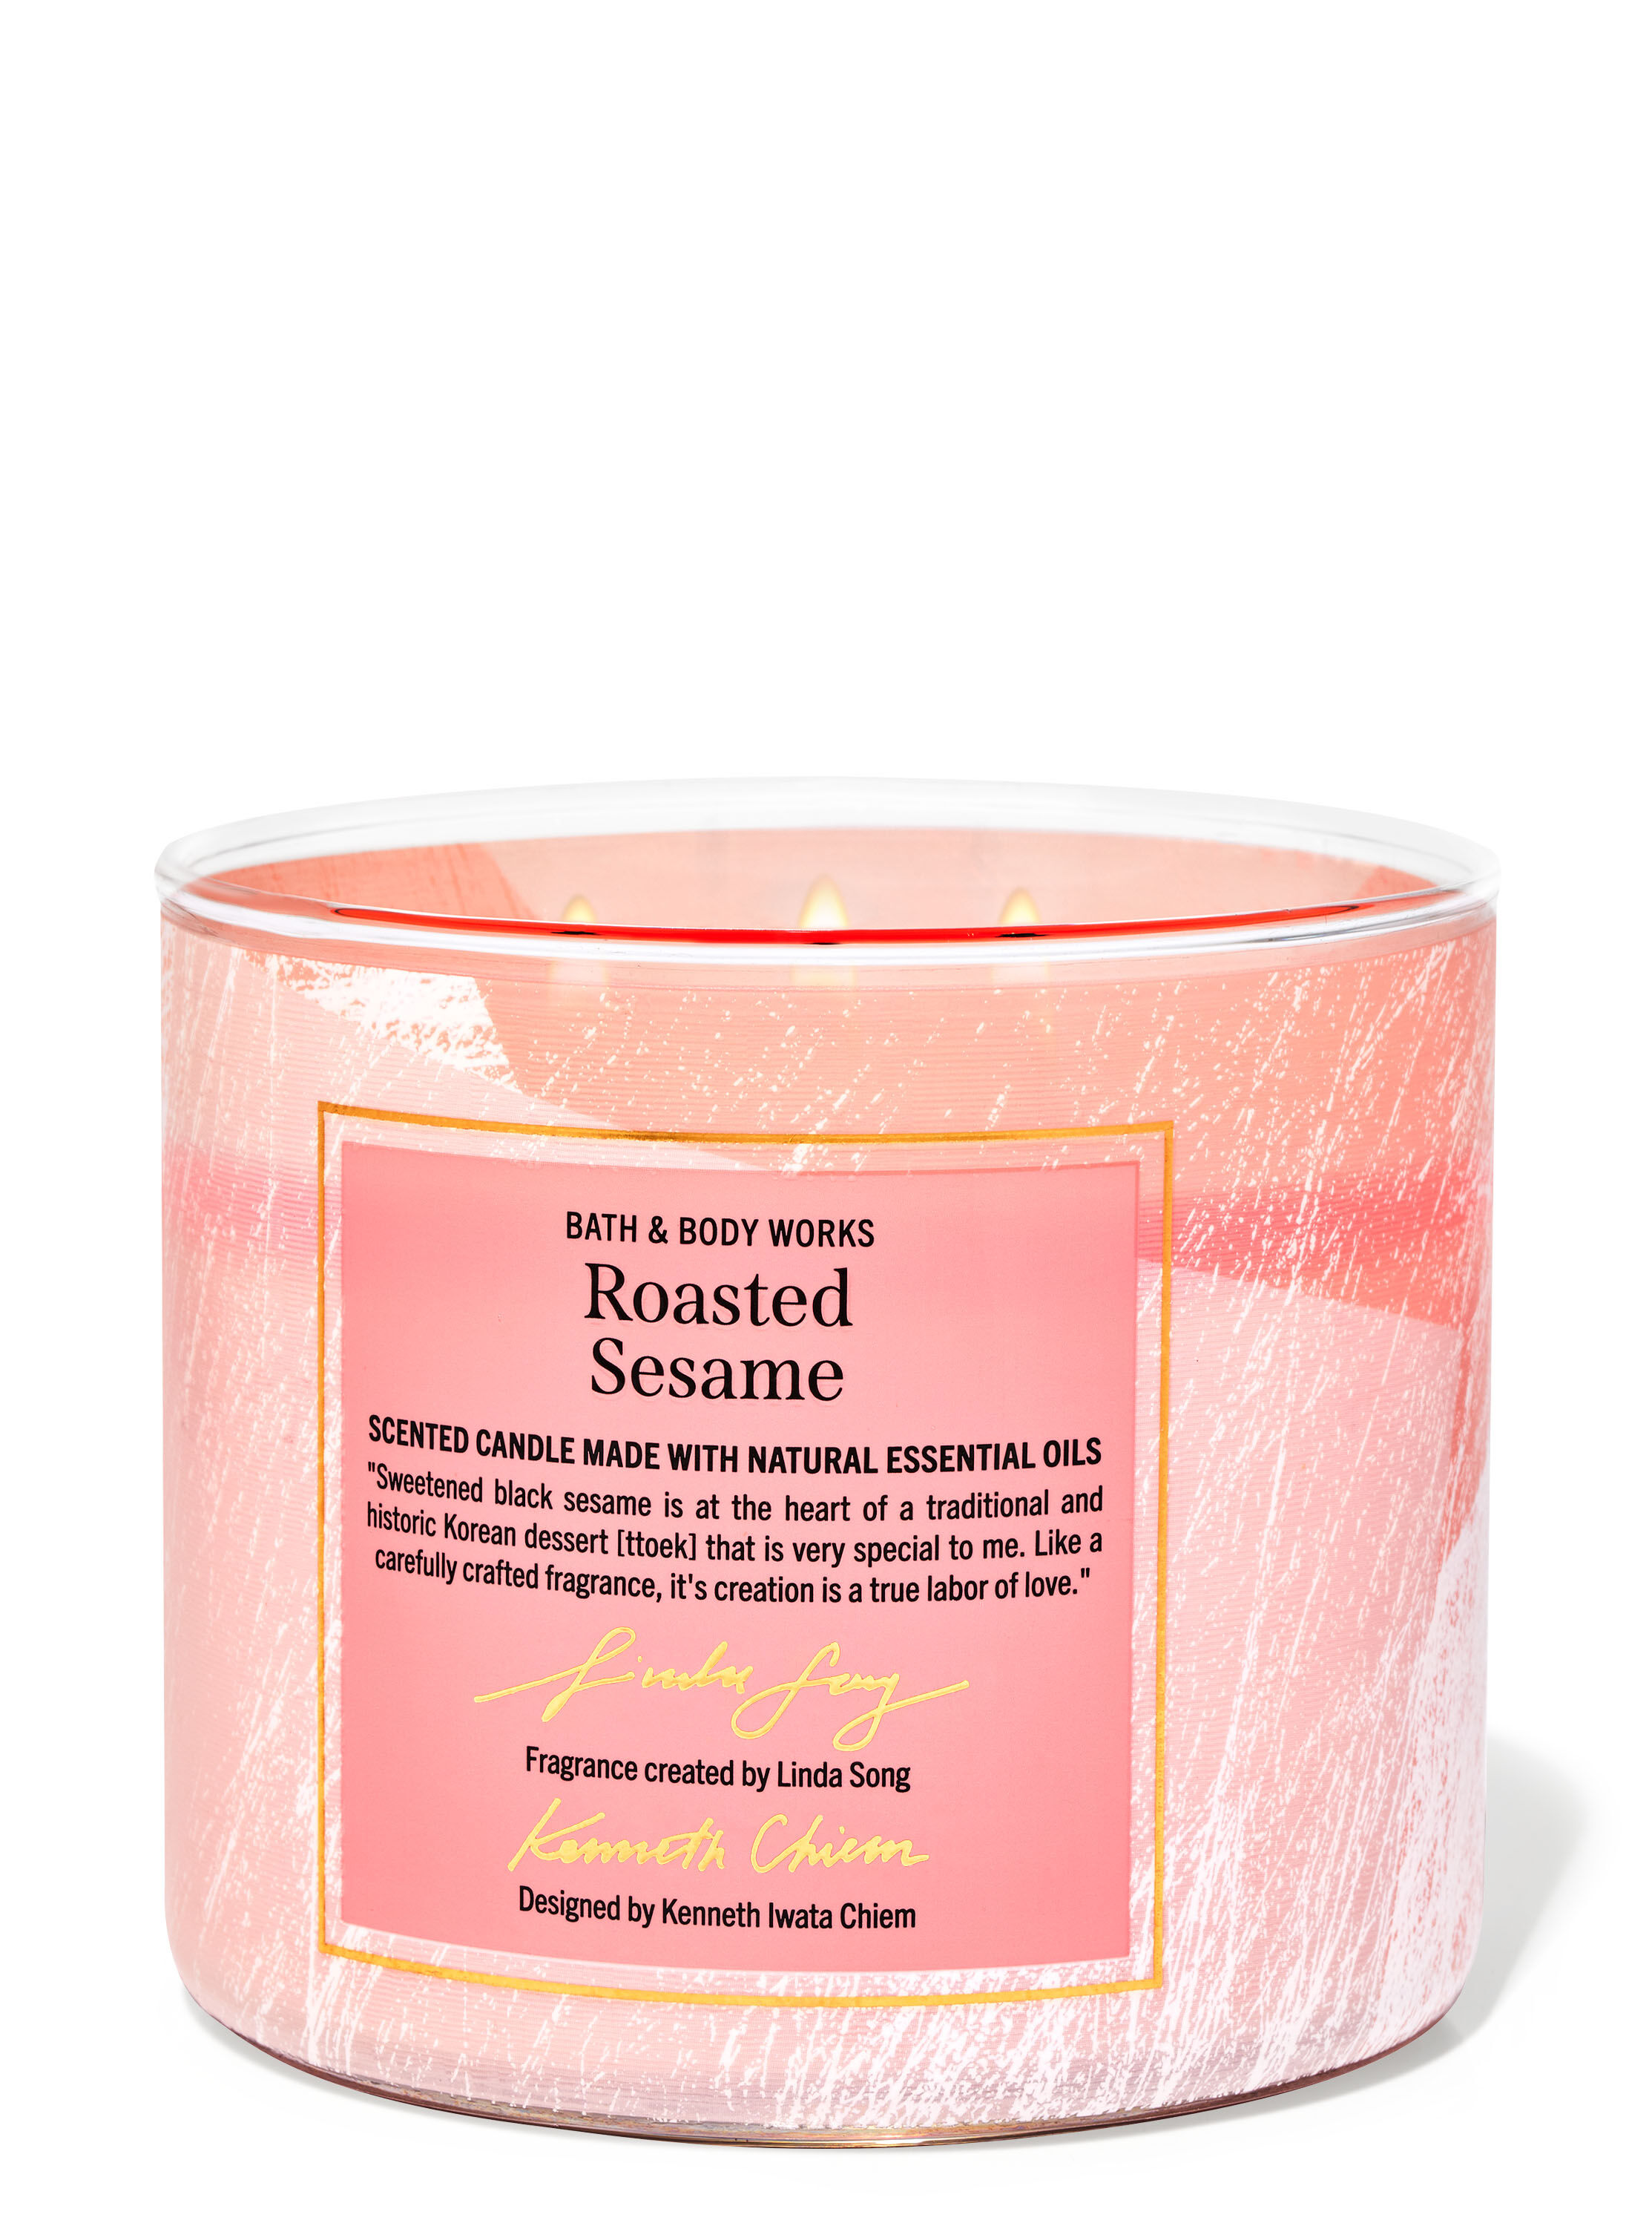 Roasted Sesame 3-Wick Candle